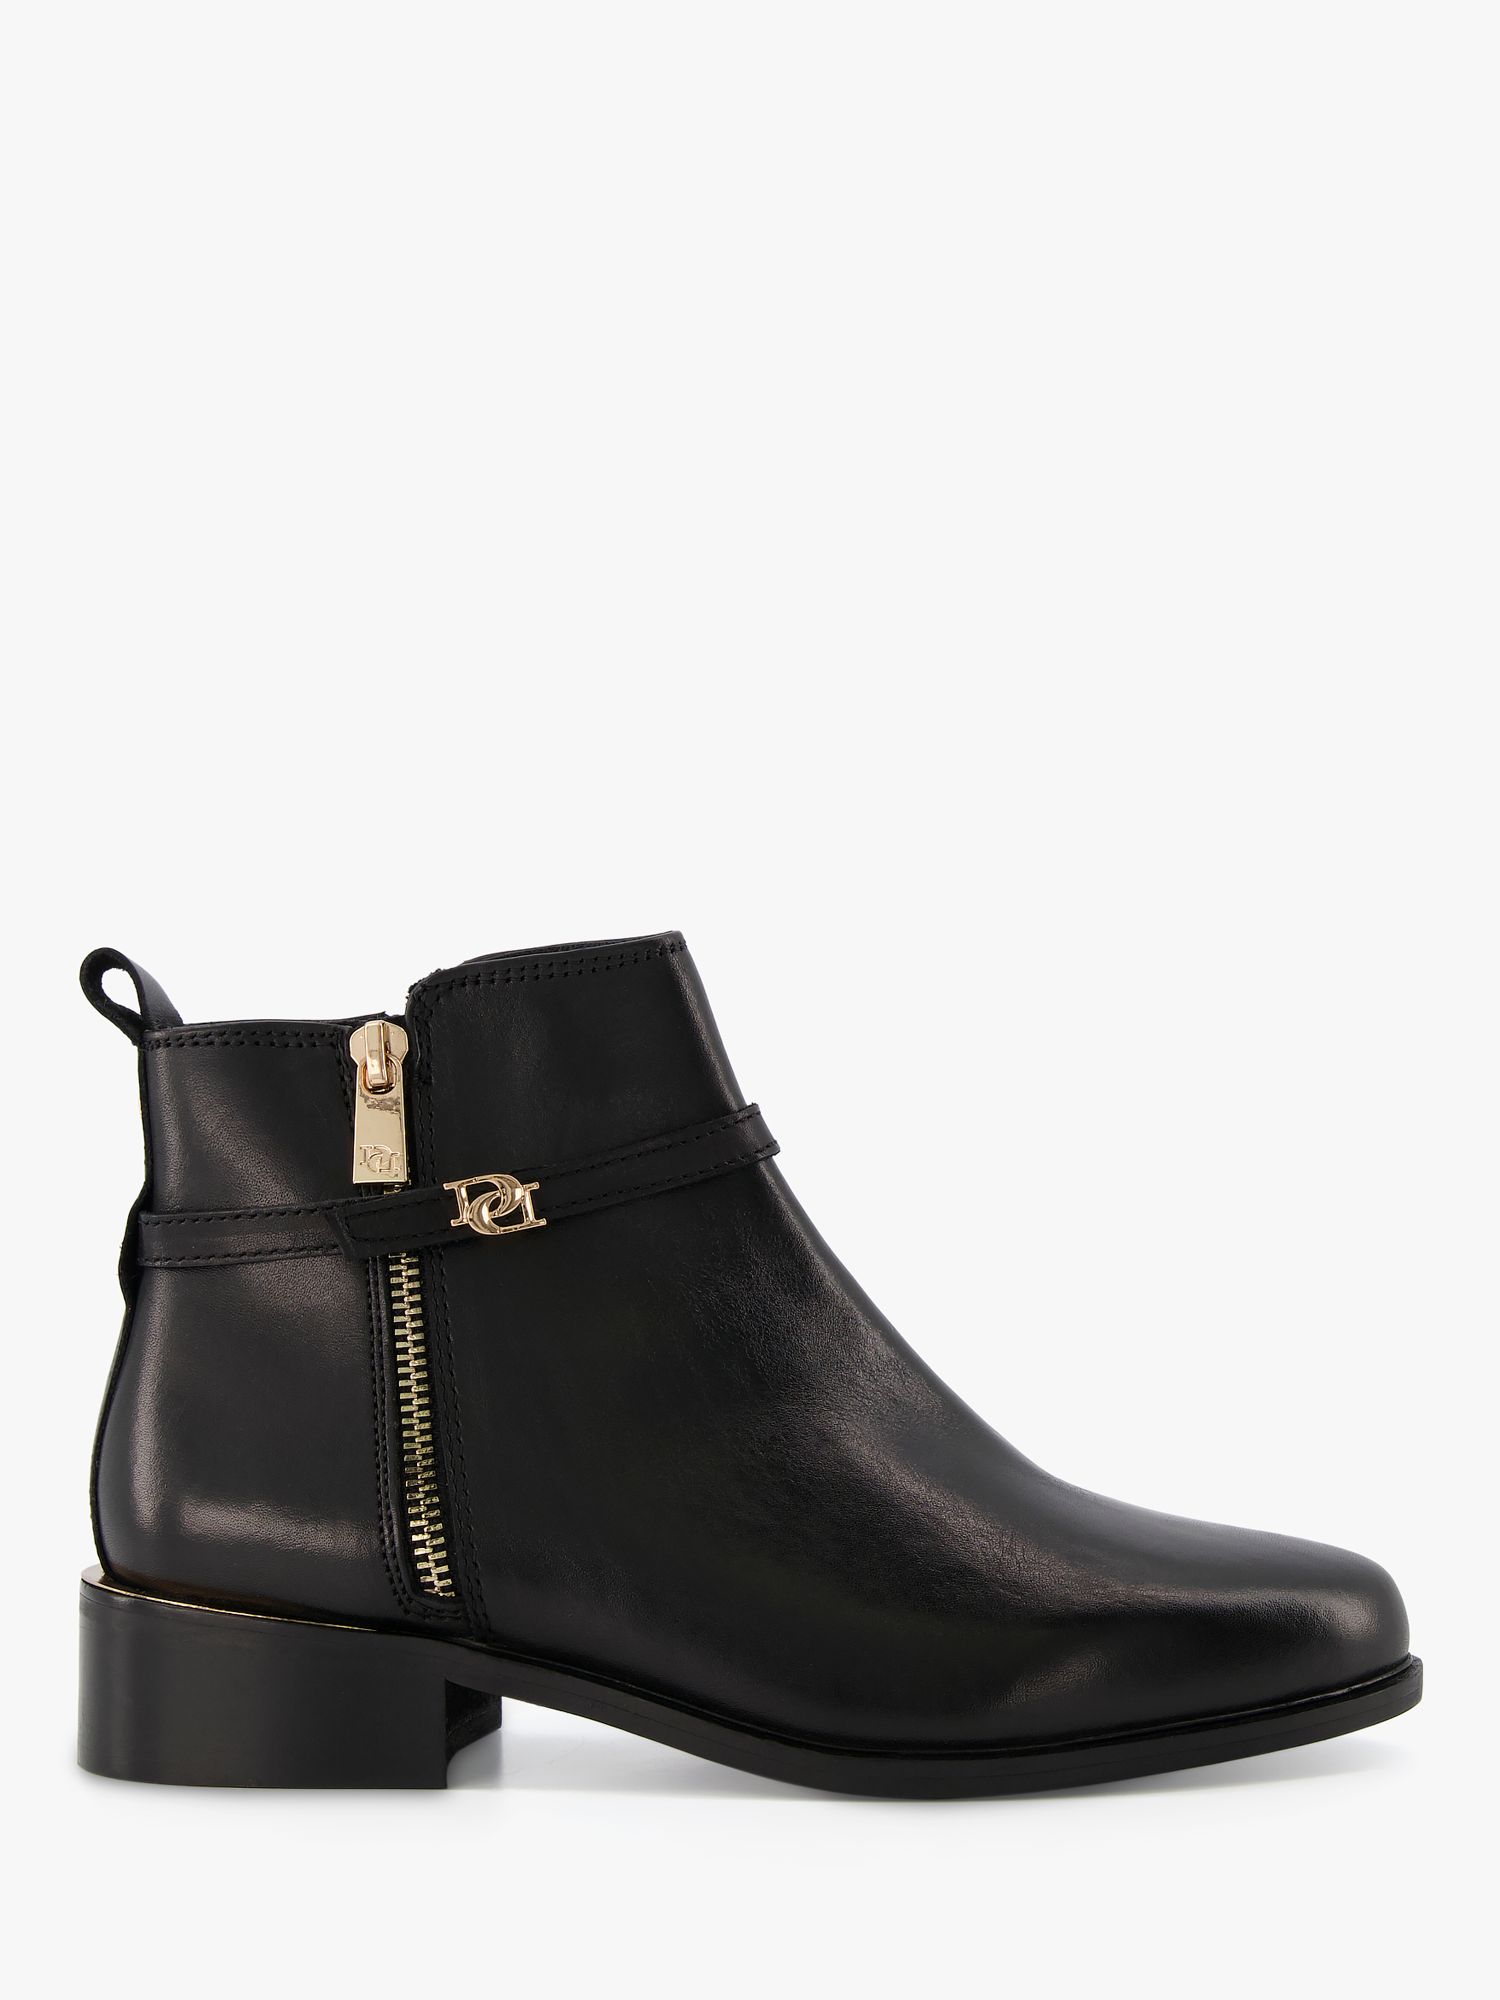 Dune Wide Fit Pap Leather Ankle Boots, Black at John Lewis & Partners